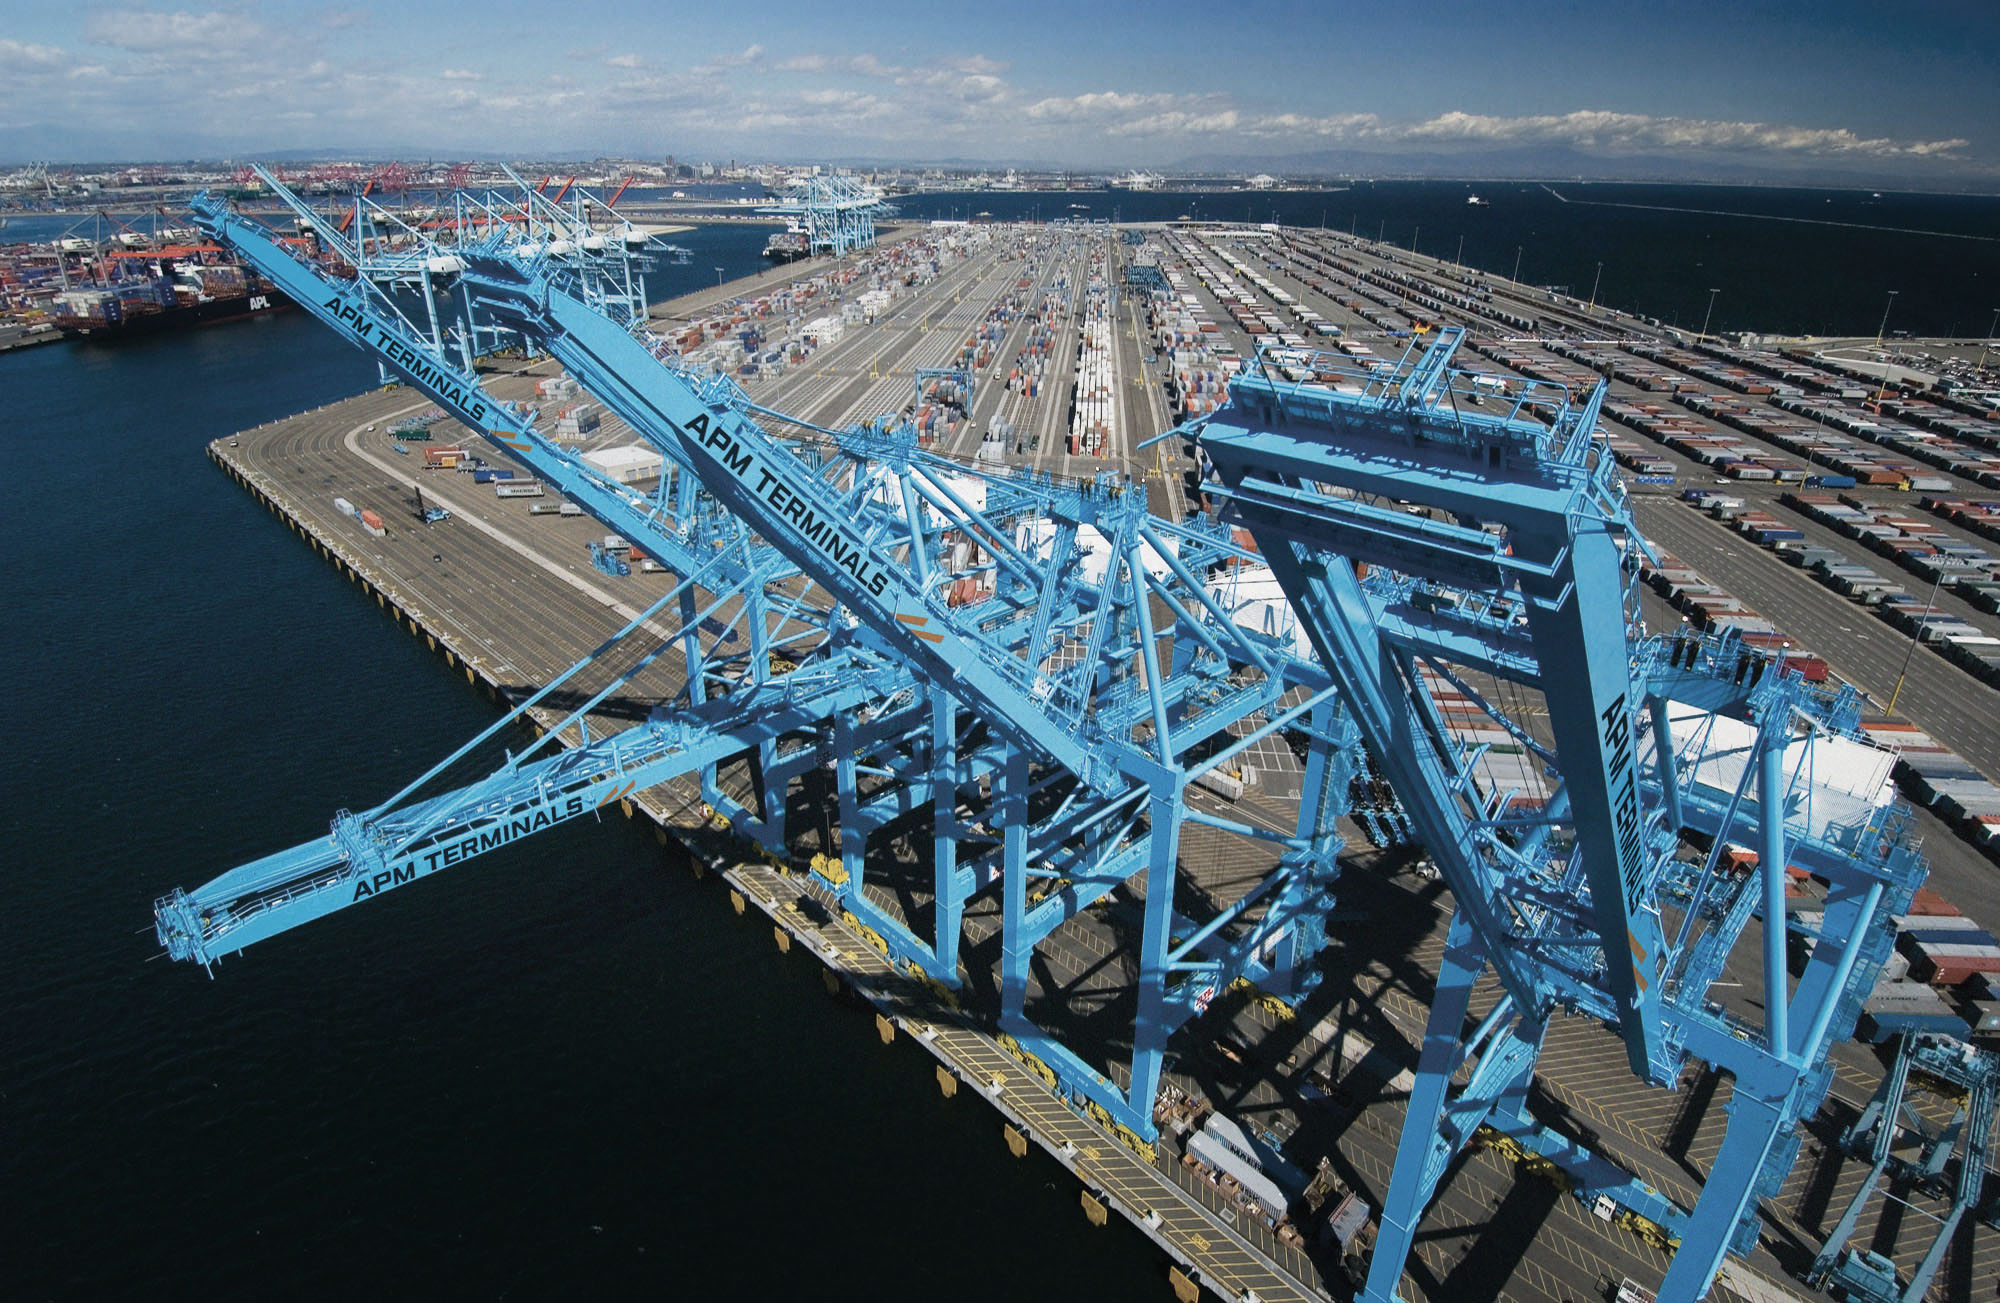 Rotterdam port: APM Terminal trialing ‘Early Gate In’